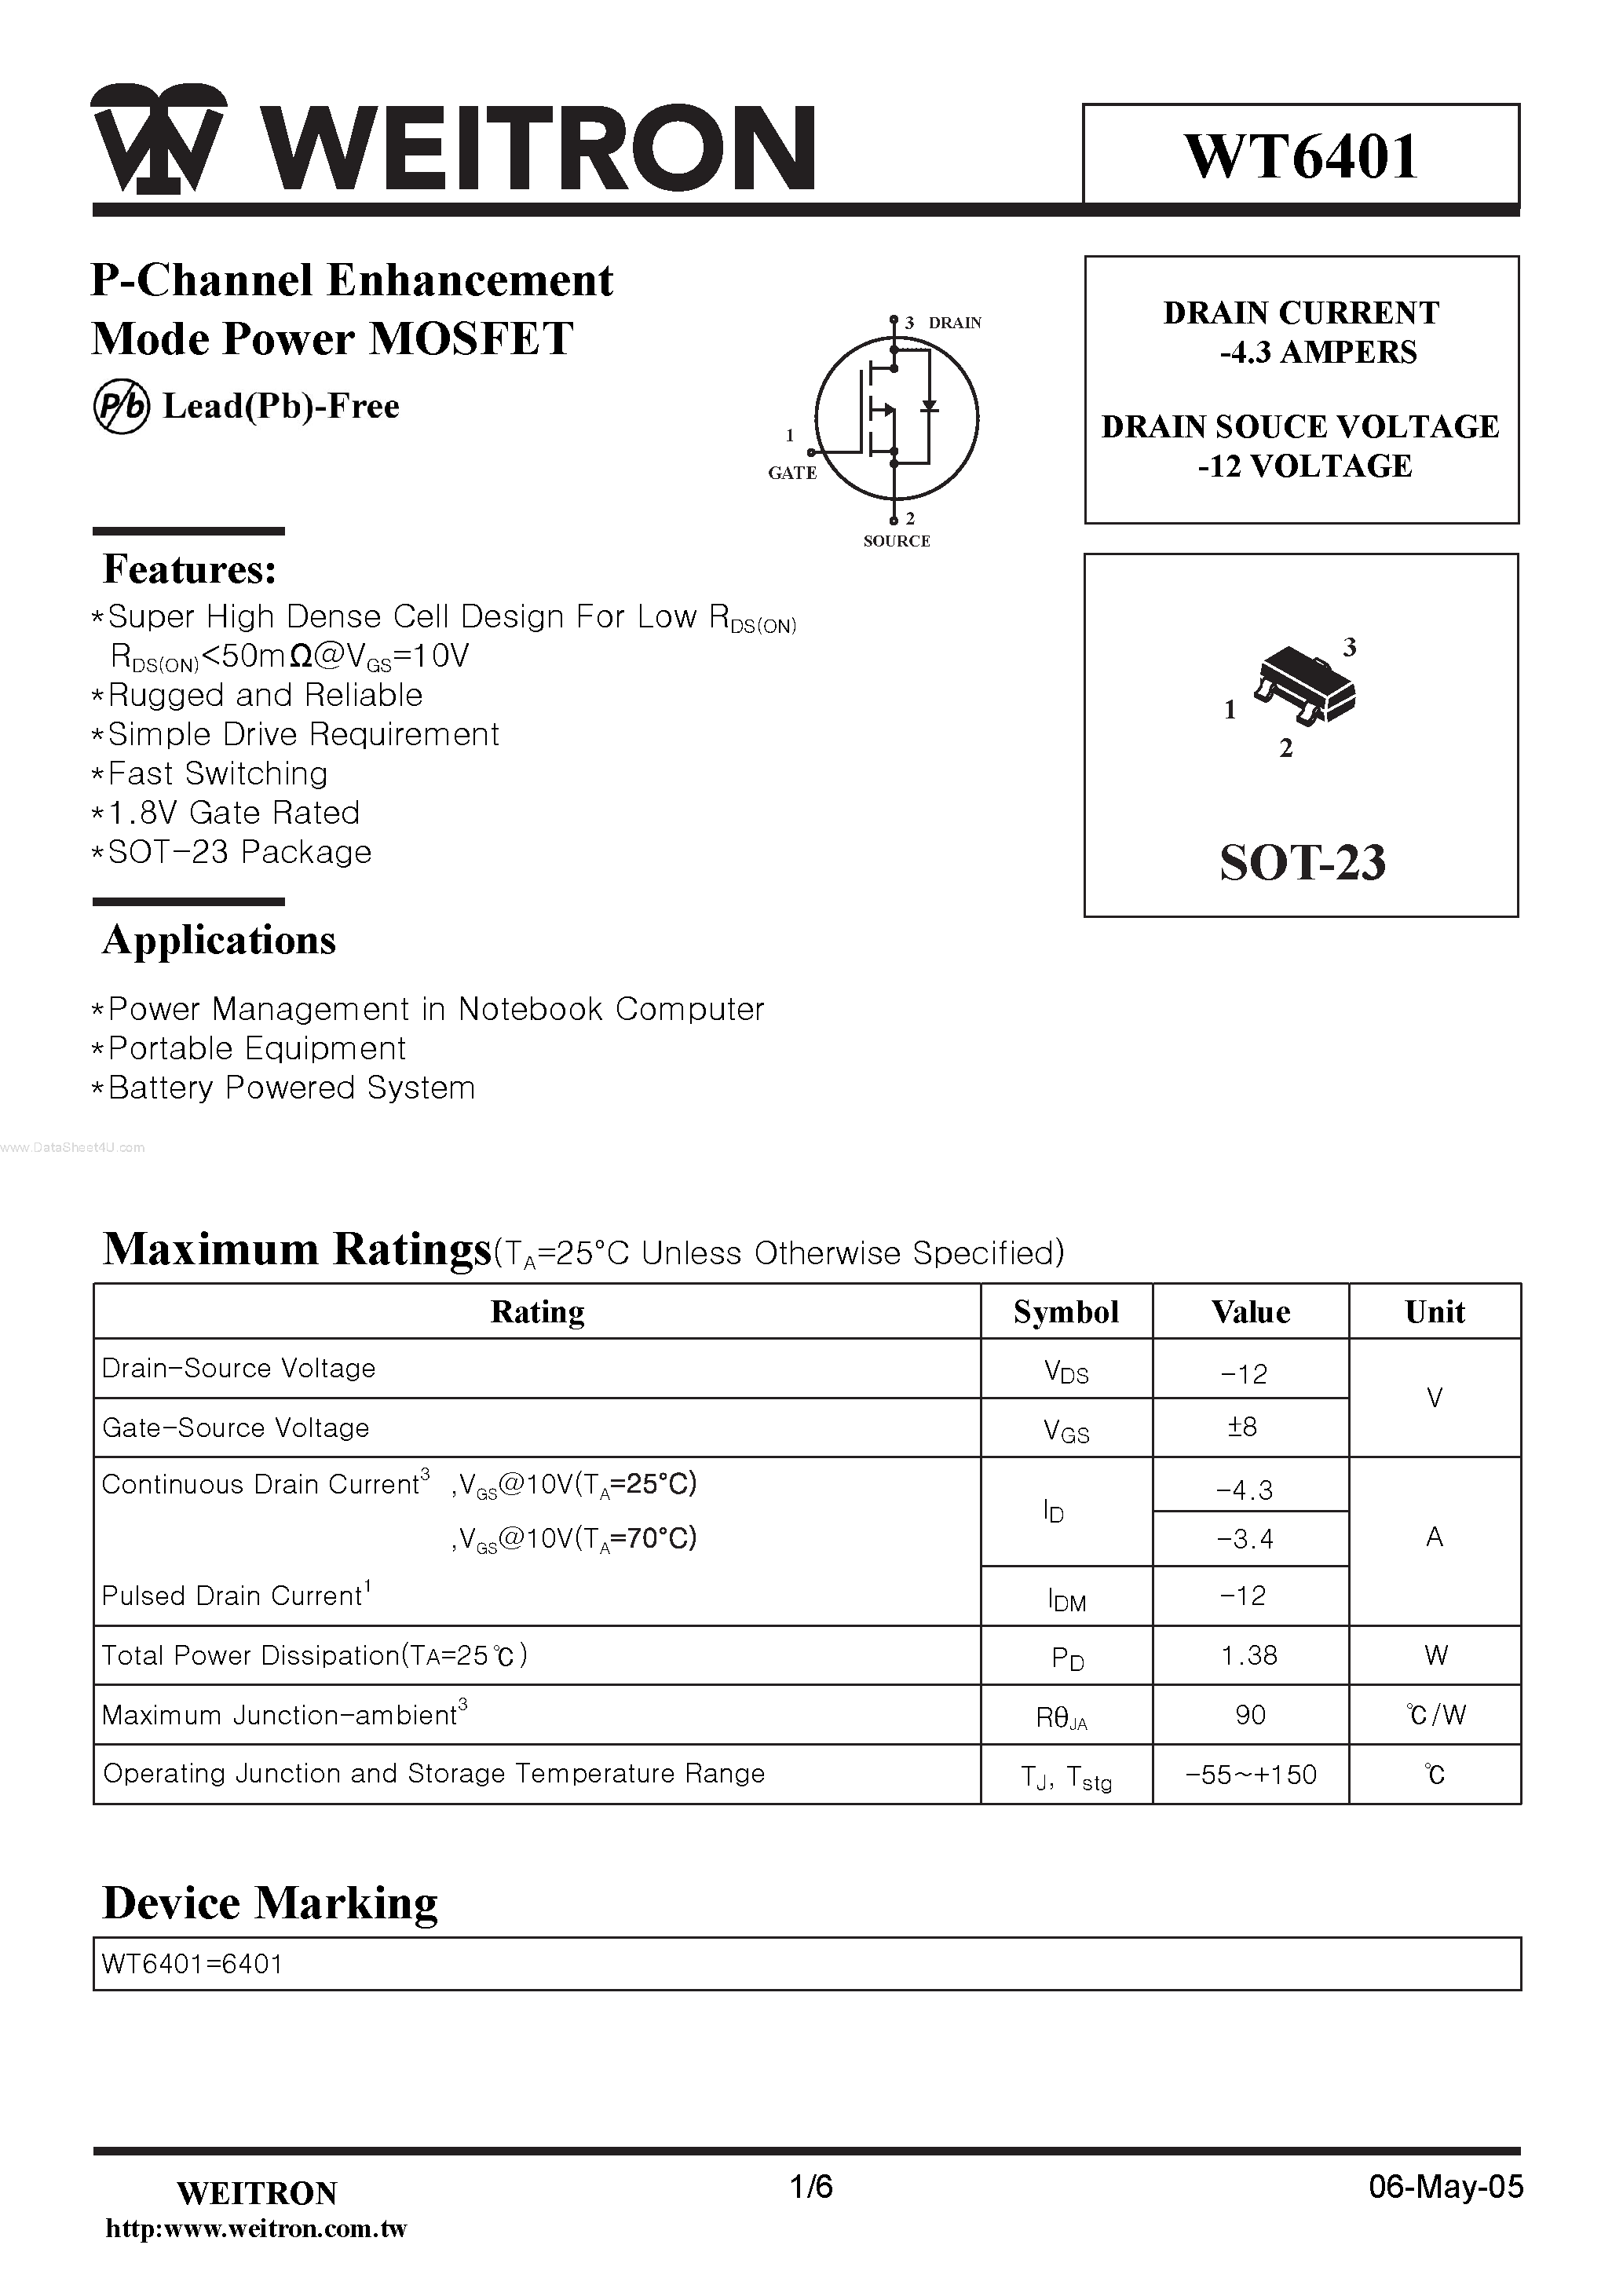 Datasheet WT6401 - P-Channel Enhancement Mode Power MOSFET page 1